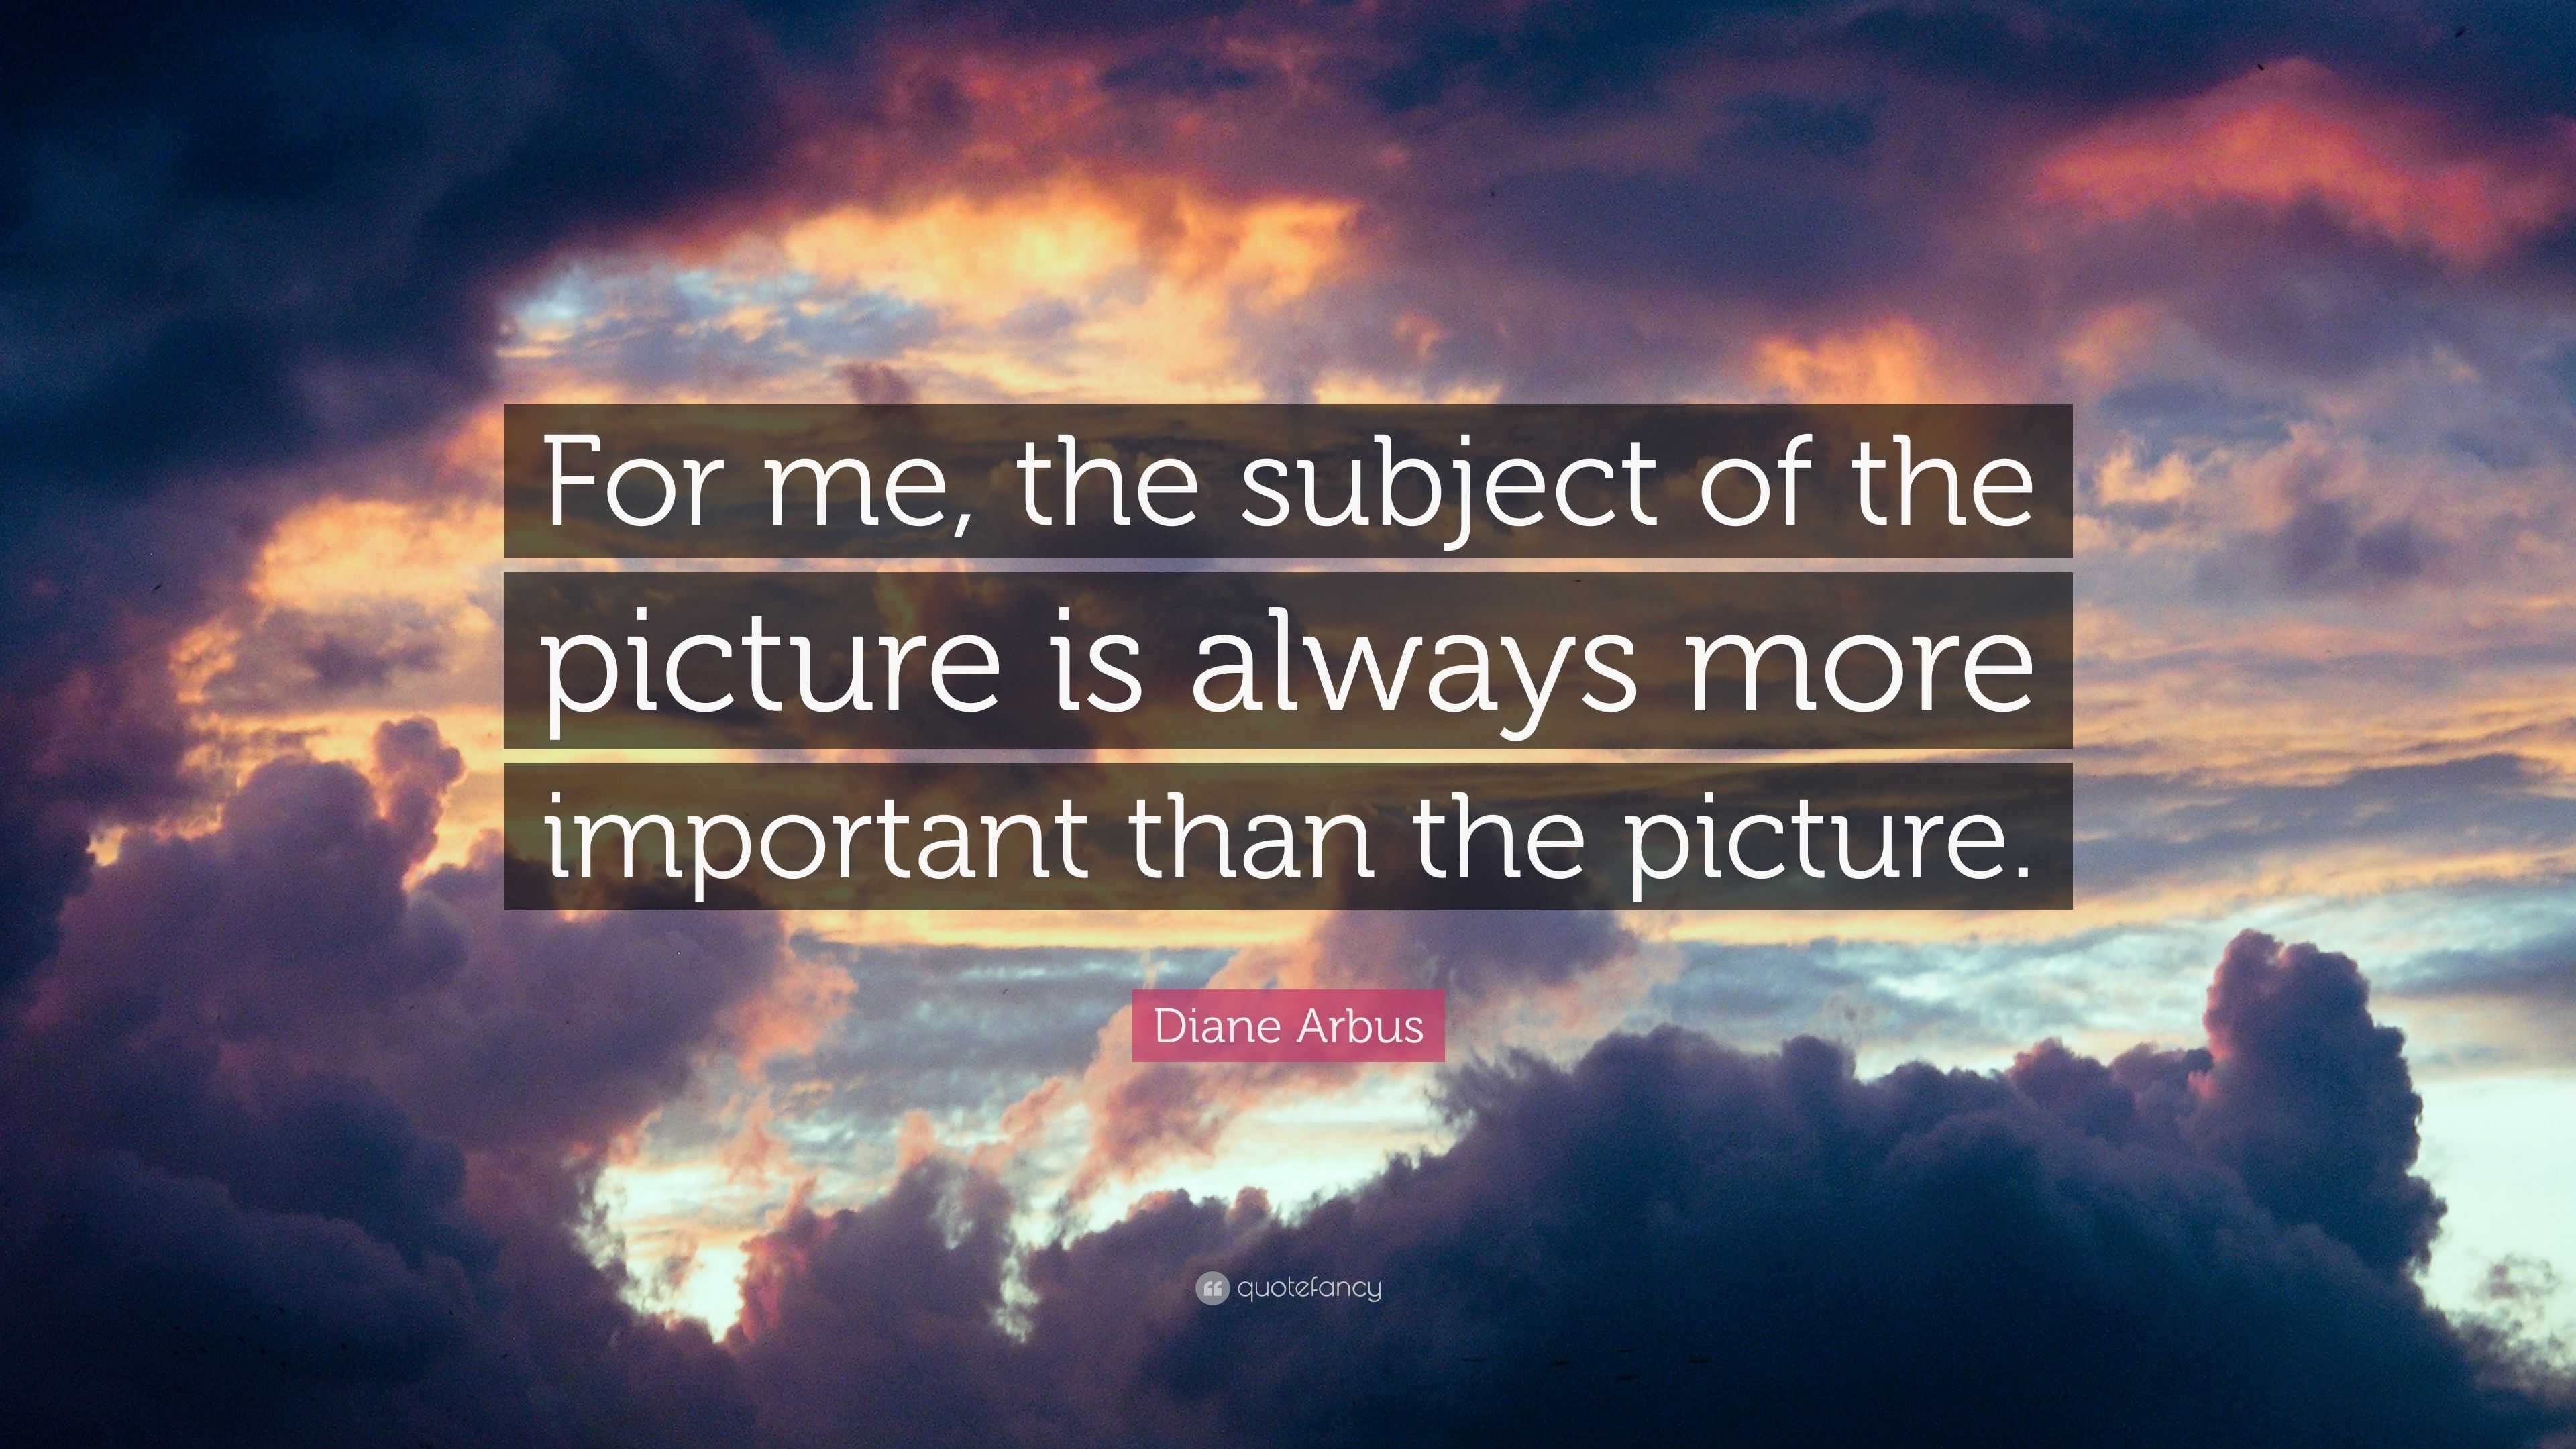 Diane Arbus Quote: “For me, the subject of the picture is always more ...